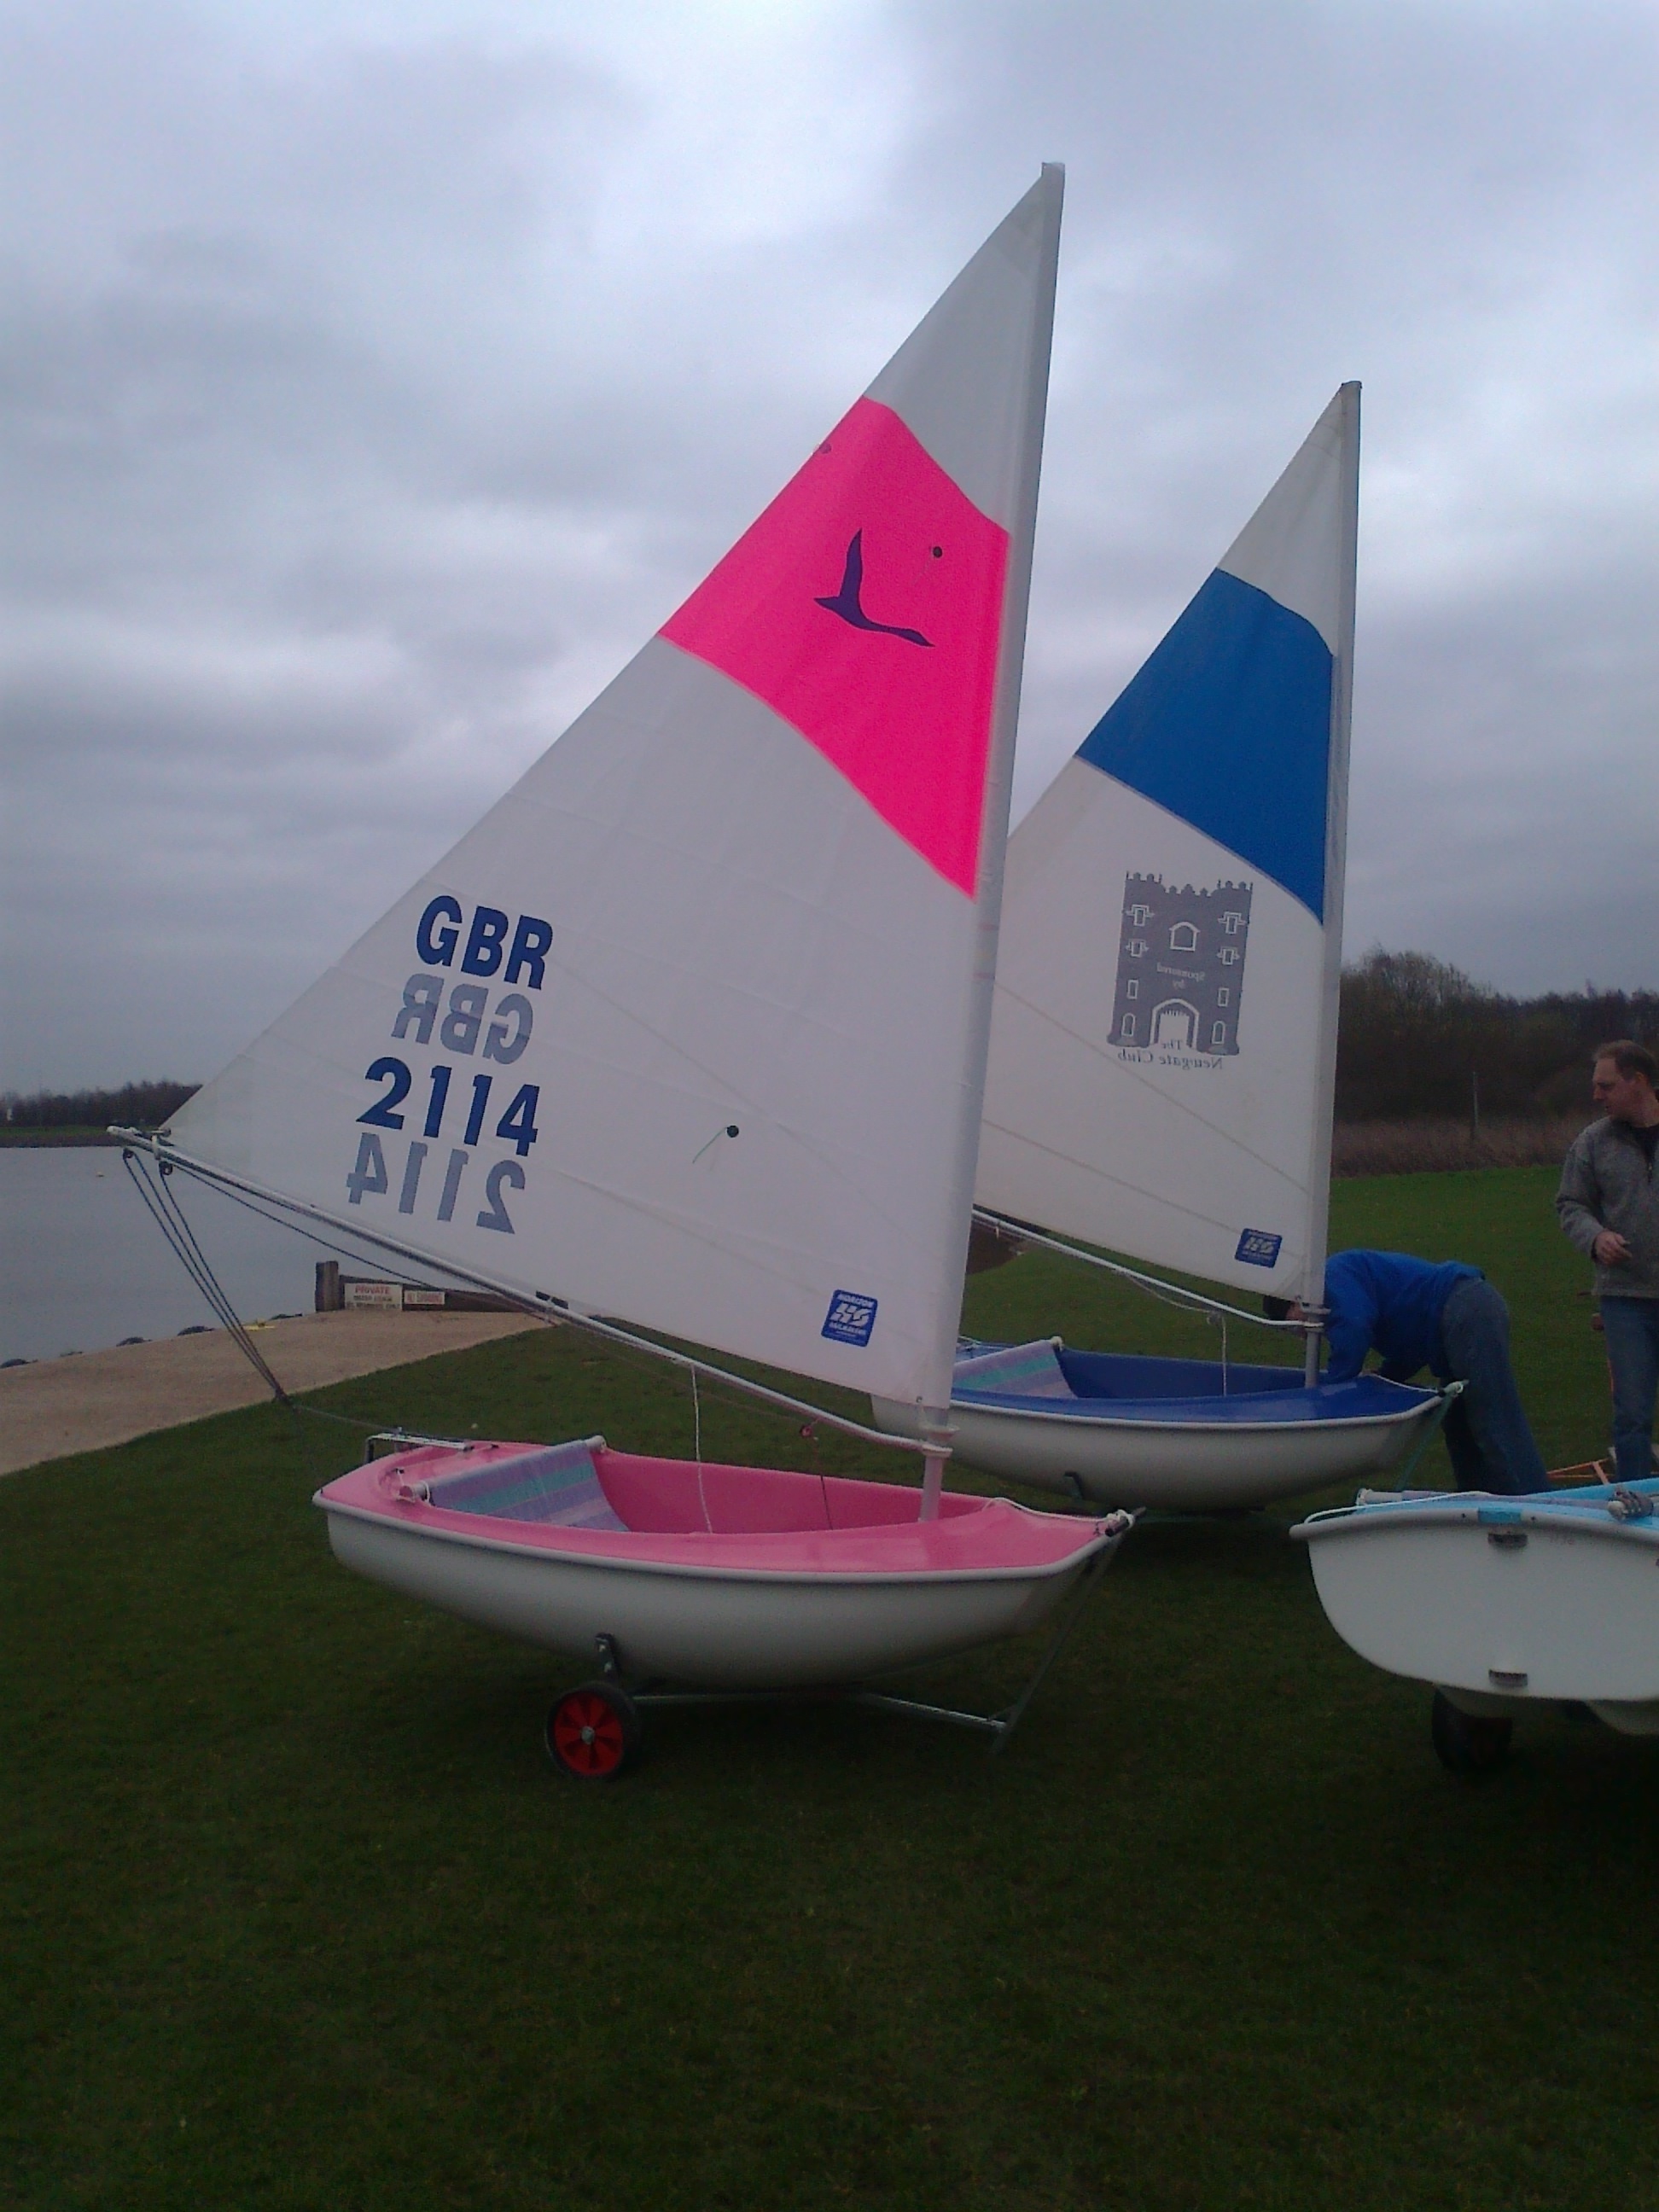 Two more dinghies arrive